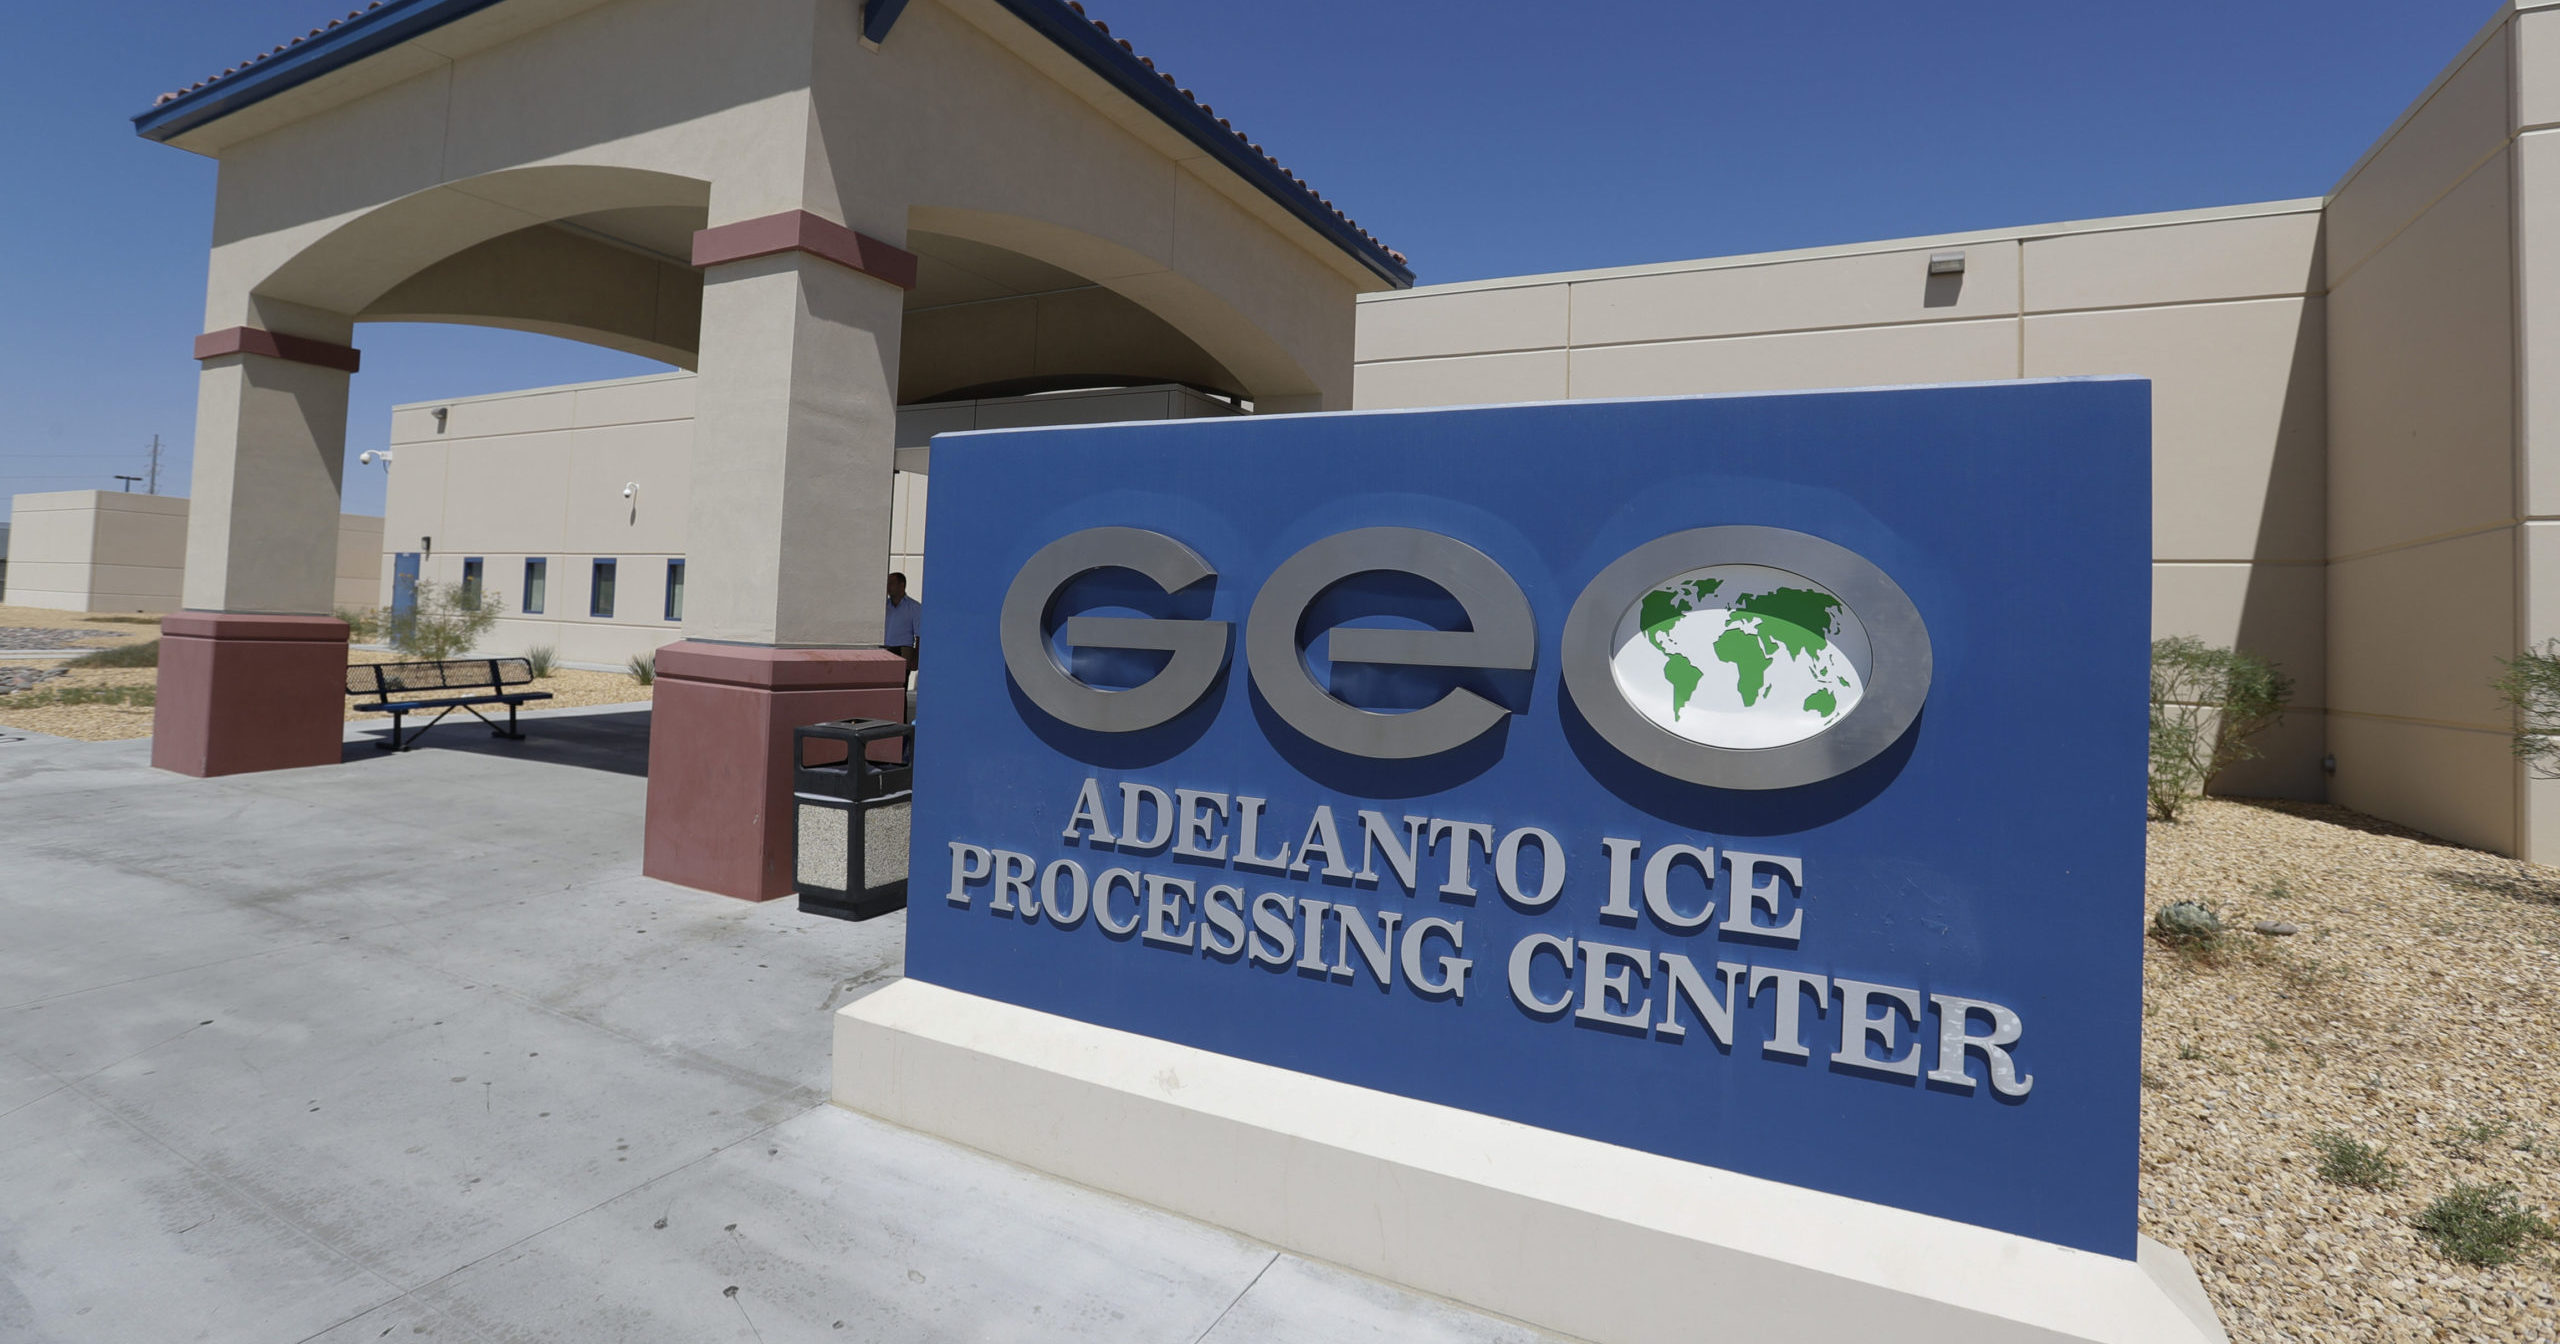 This Aug. 28, 2019, file photo shows the Adelanto US Immigration and Enforcement Processing Center operated by GEO Group, a Florida-based company specializing in privatized corrections, in Adelanto, California.